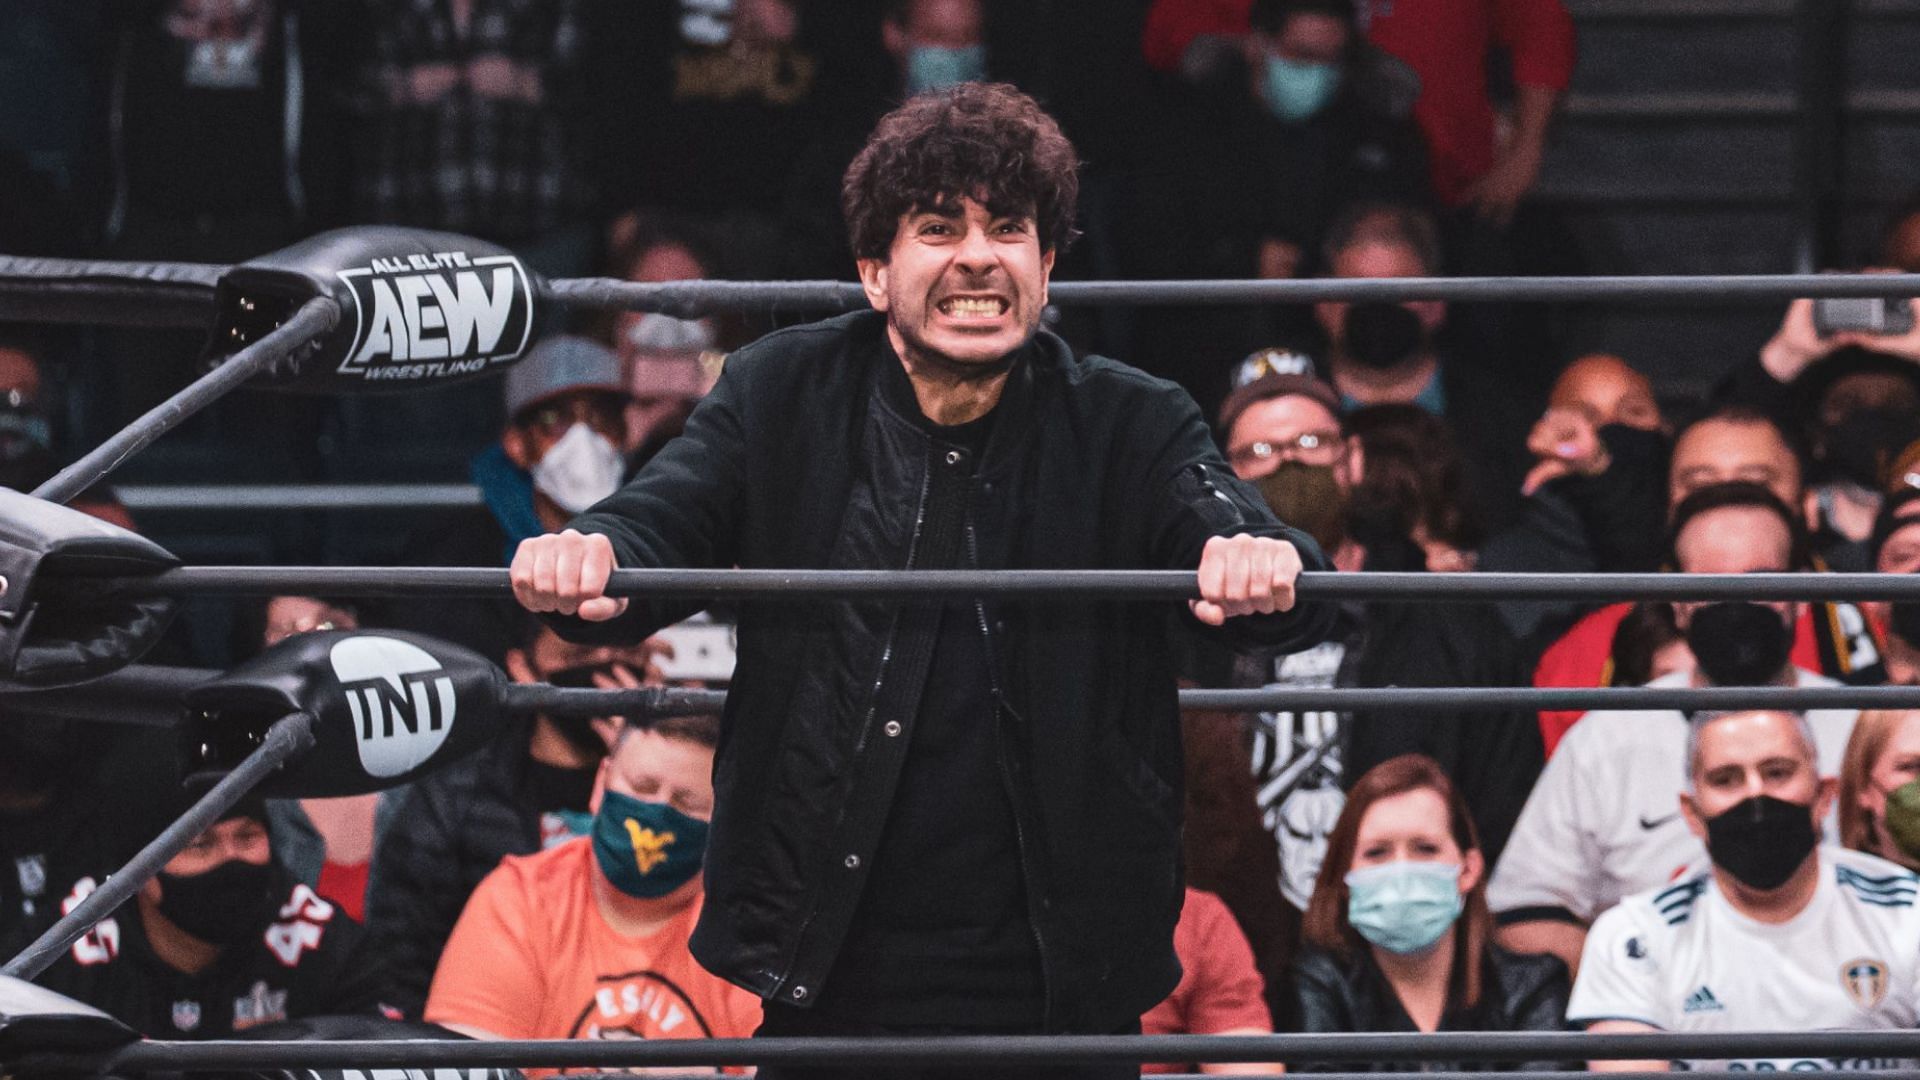 A rumored AEW signing has reacted to a promo on Twitter